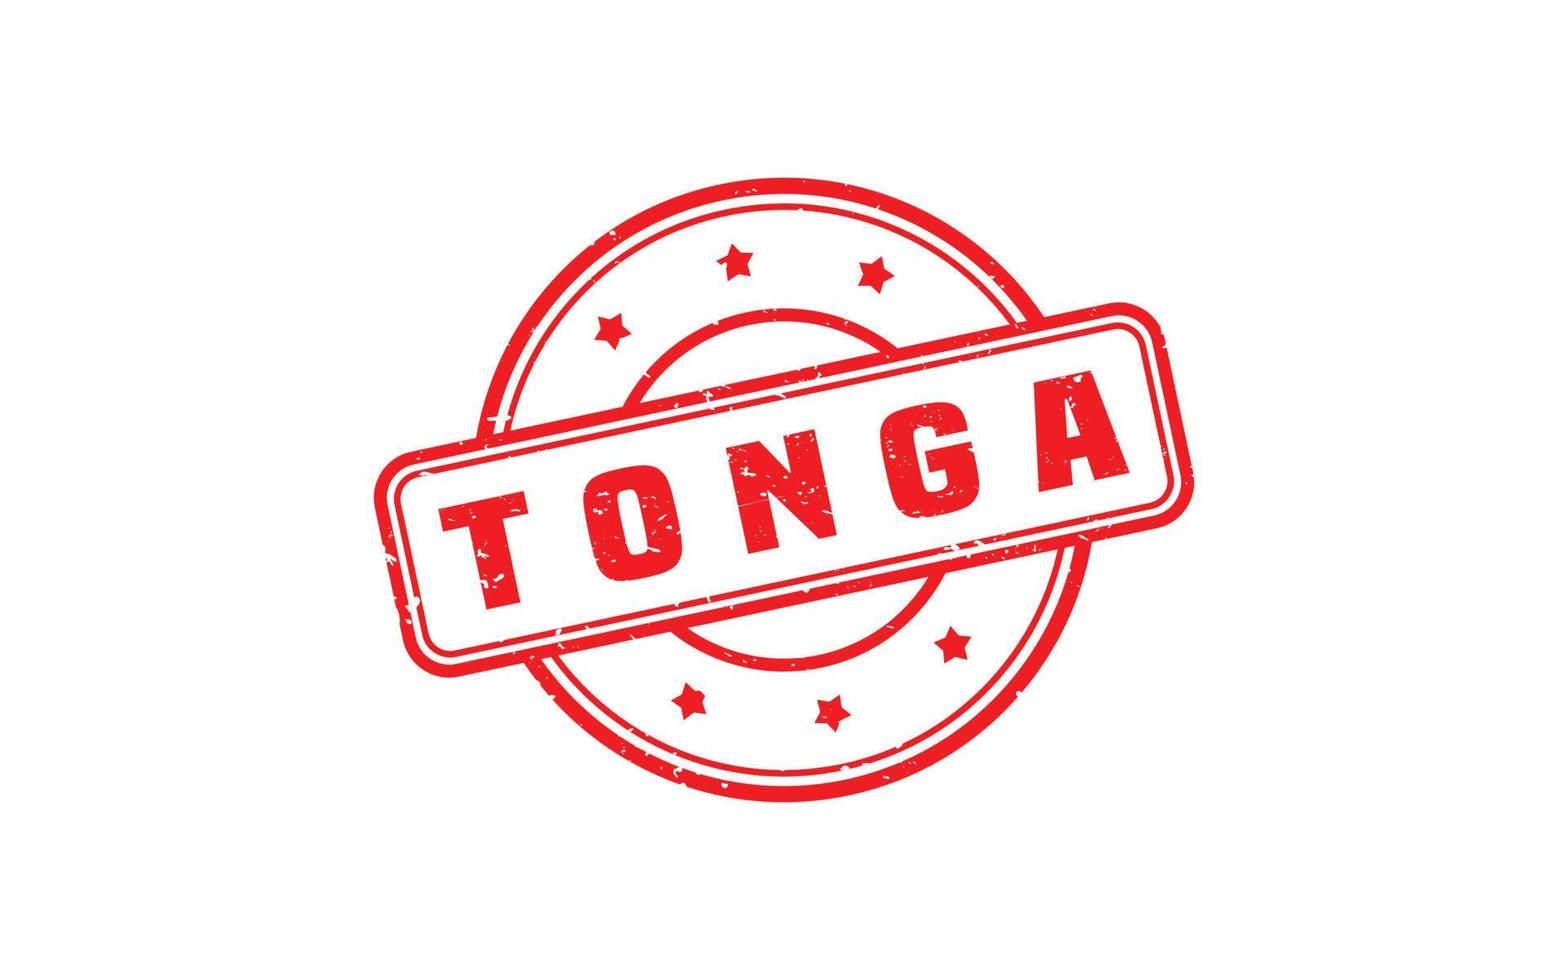 Tonga stamp rubber with grunge style on white background vector